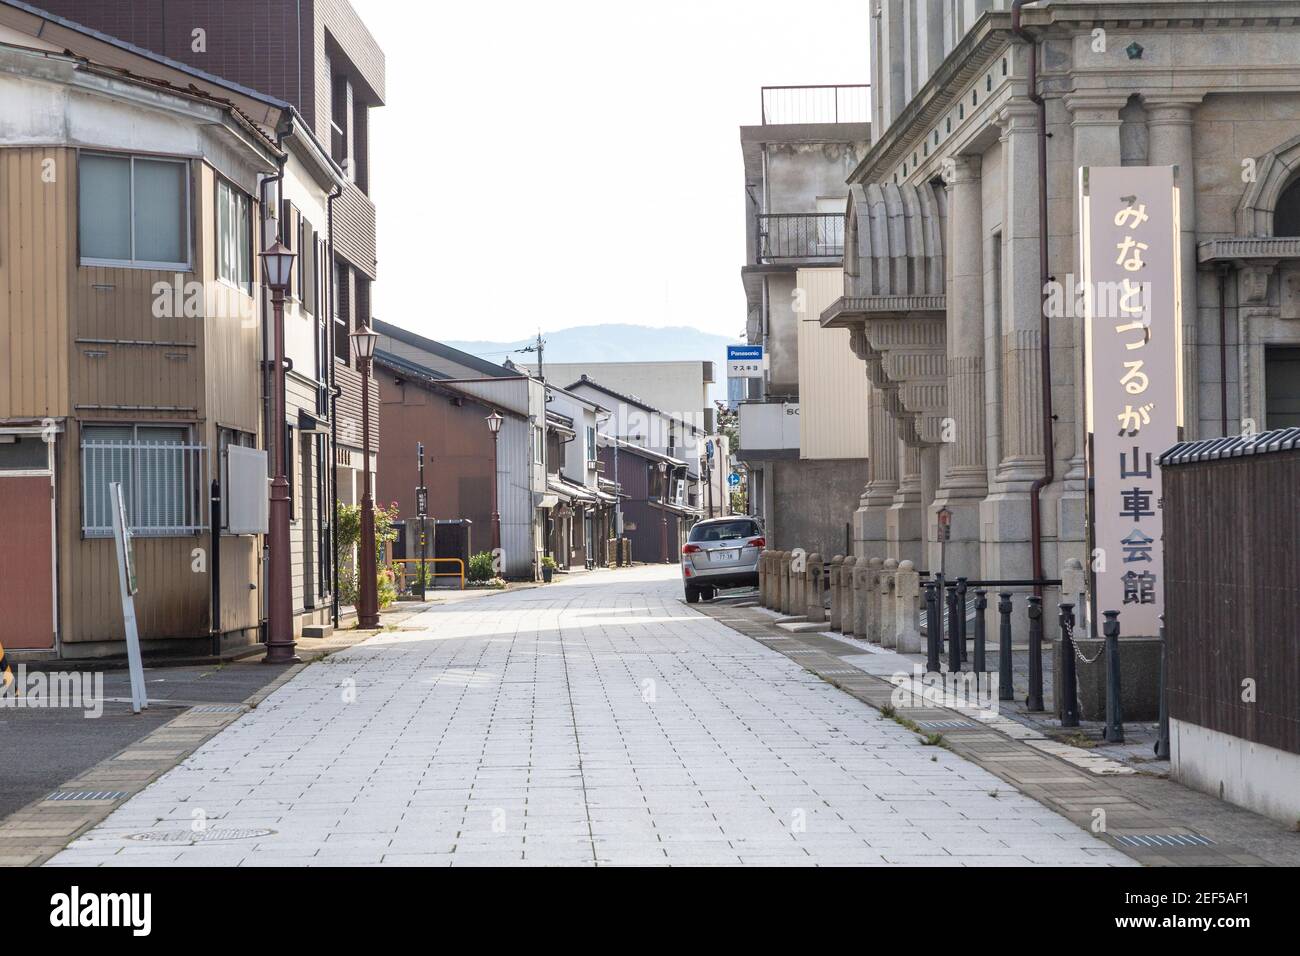 Townscapes of old town in Tsuruga, Fukui, Japan. Stock Photo